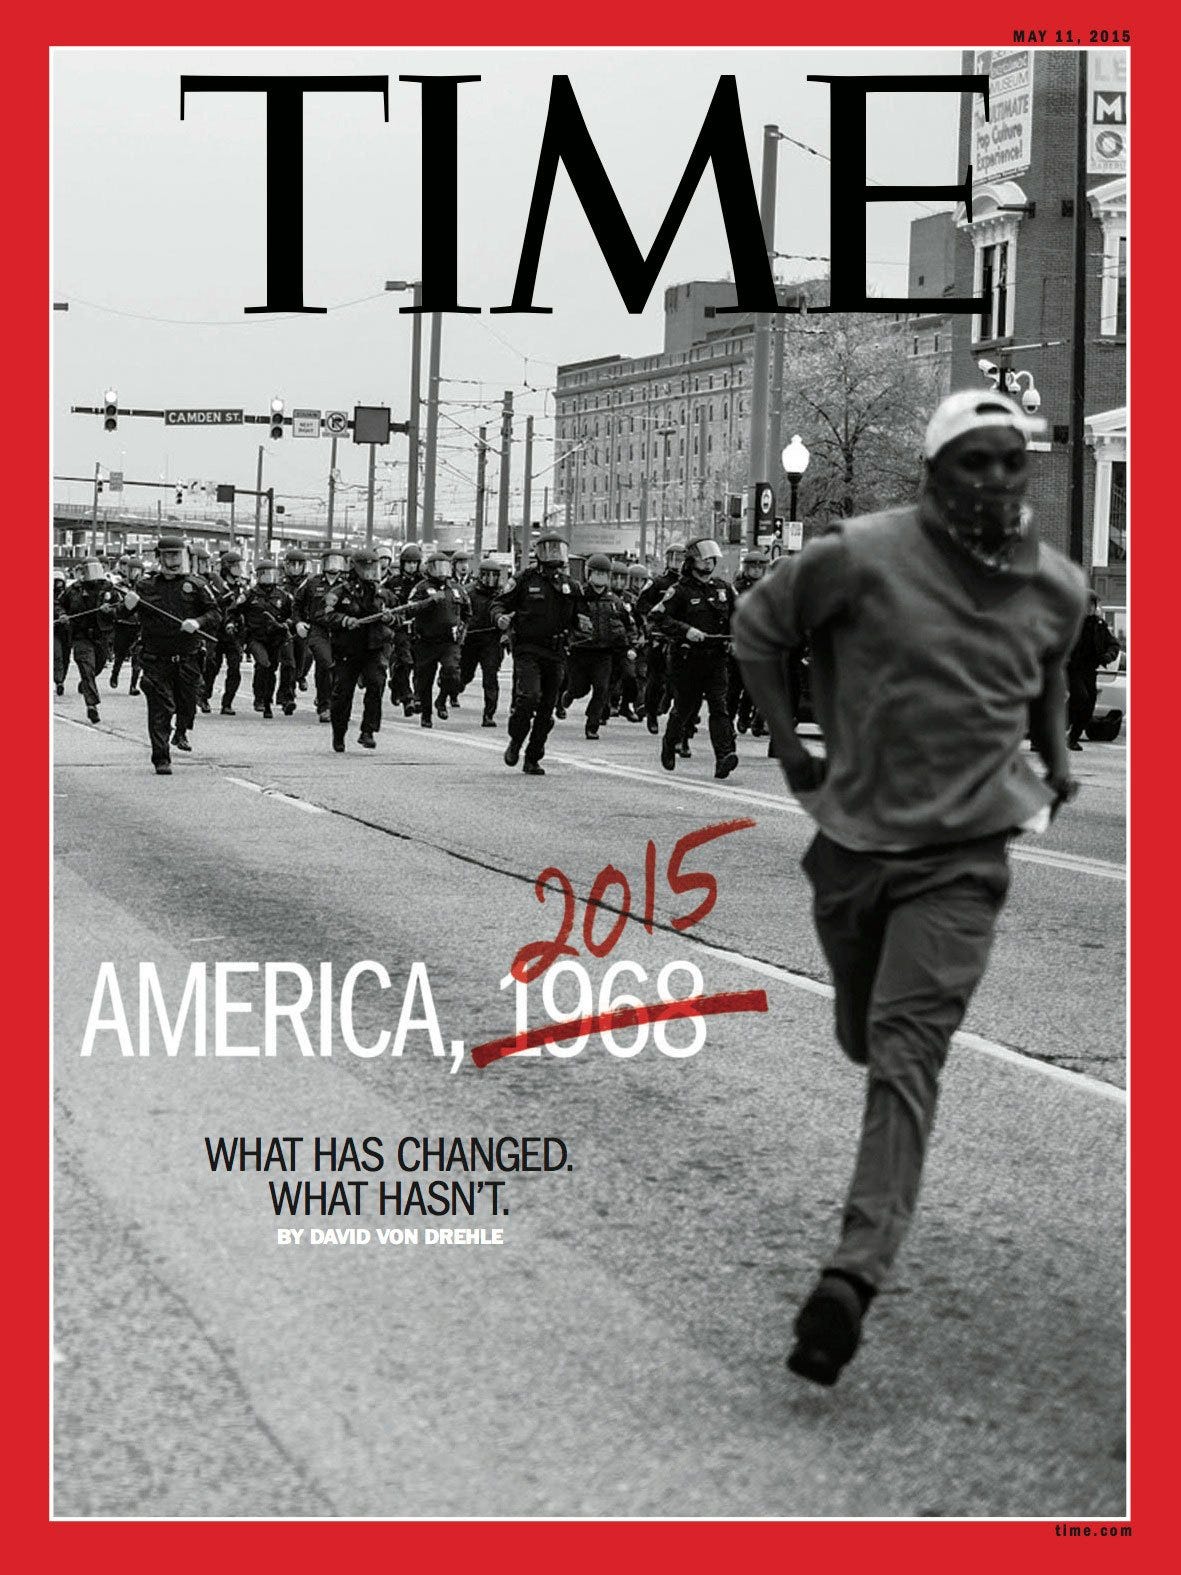 The Story Behind TIME's George Floyd Protest Cover | Time